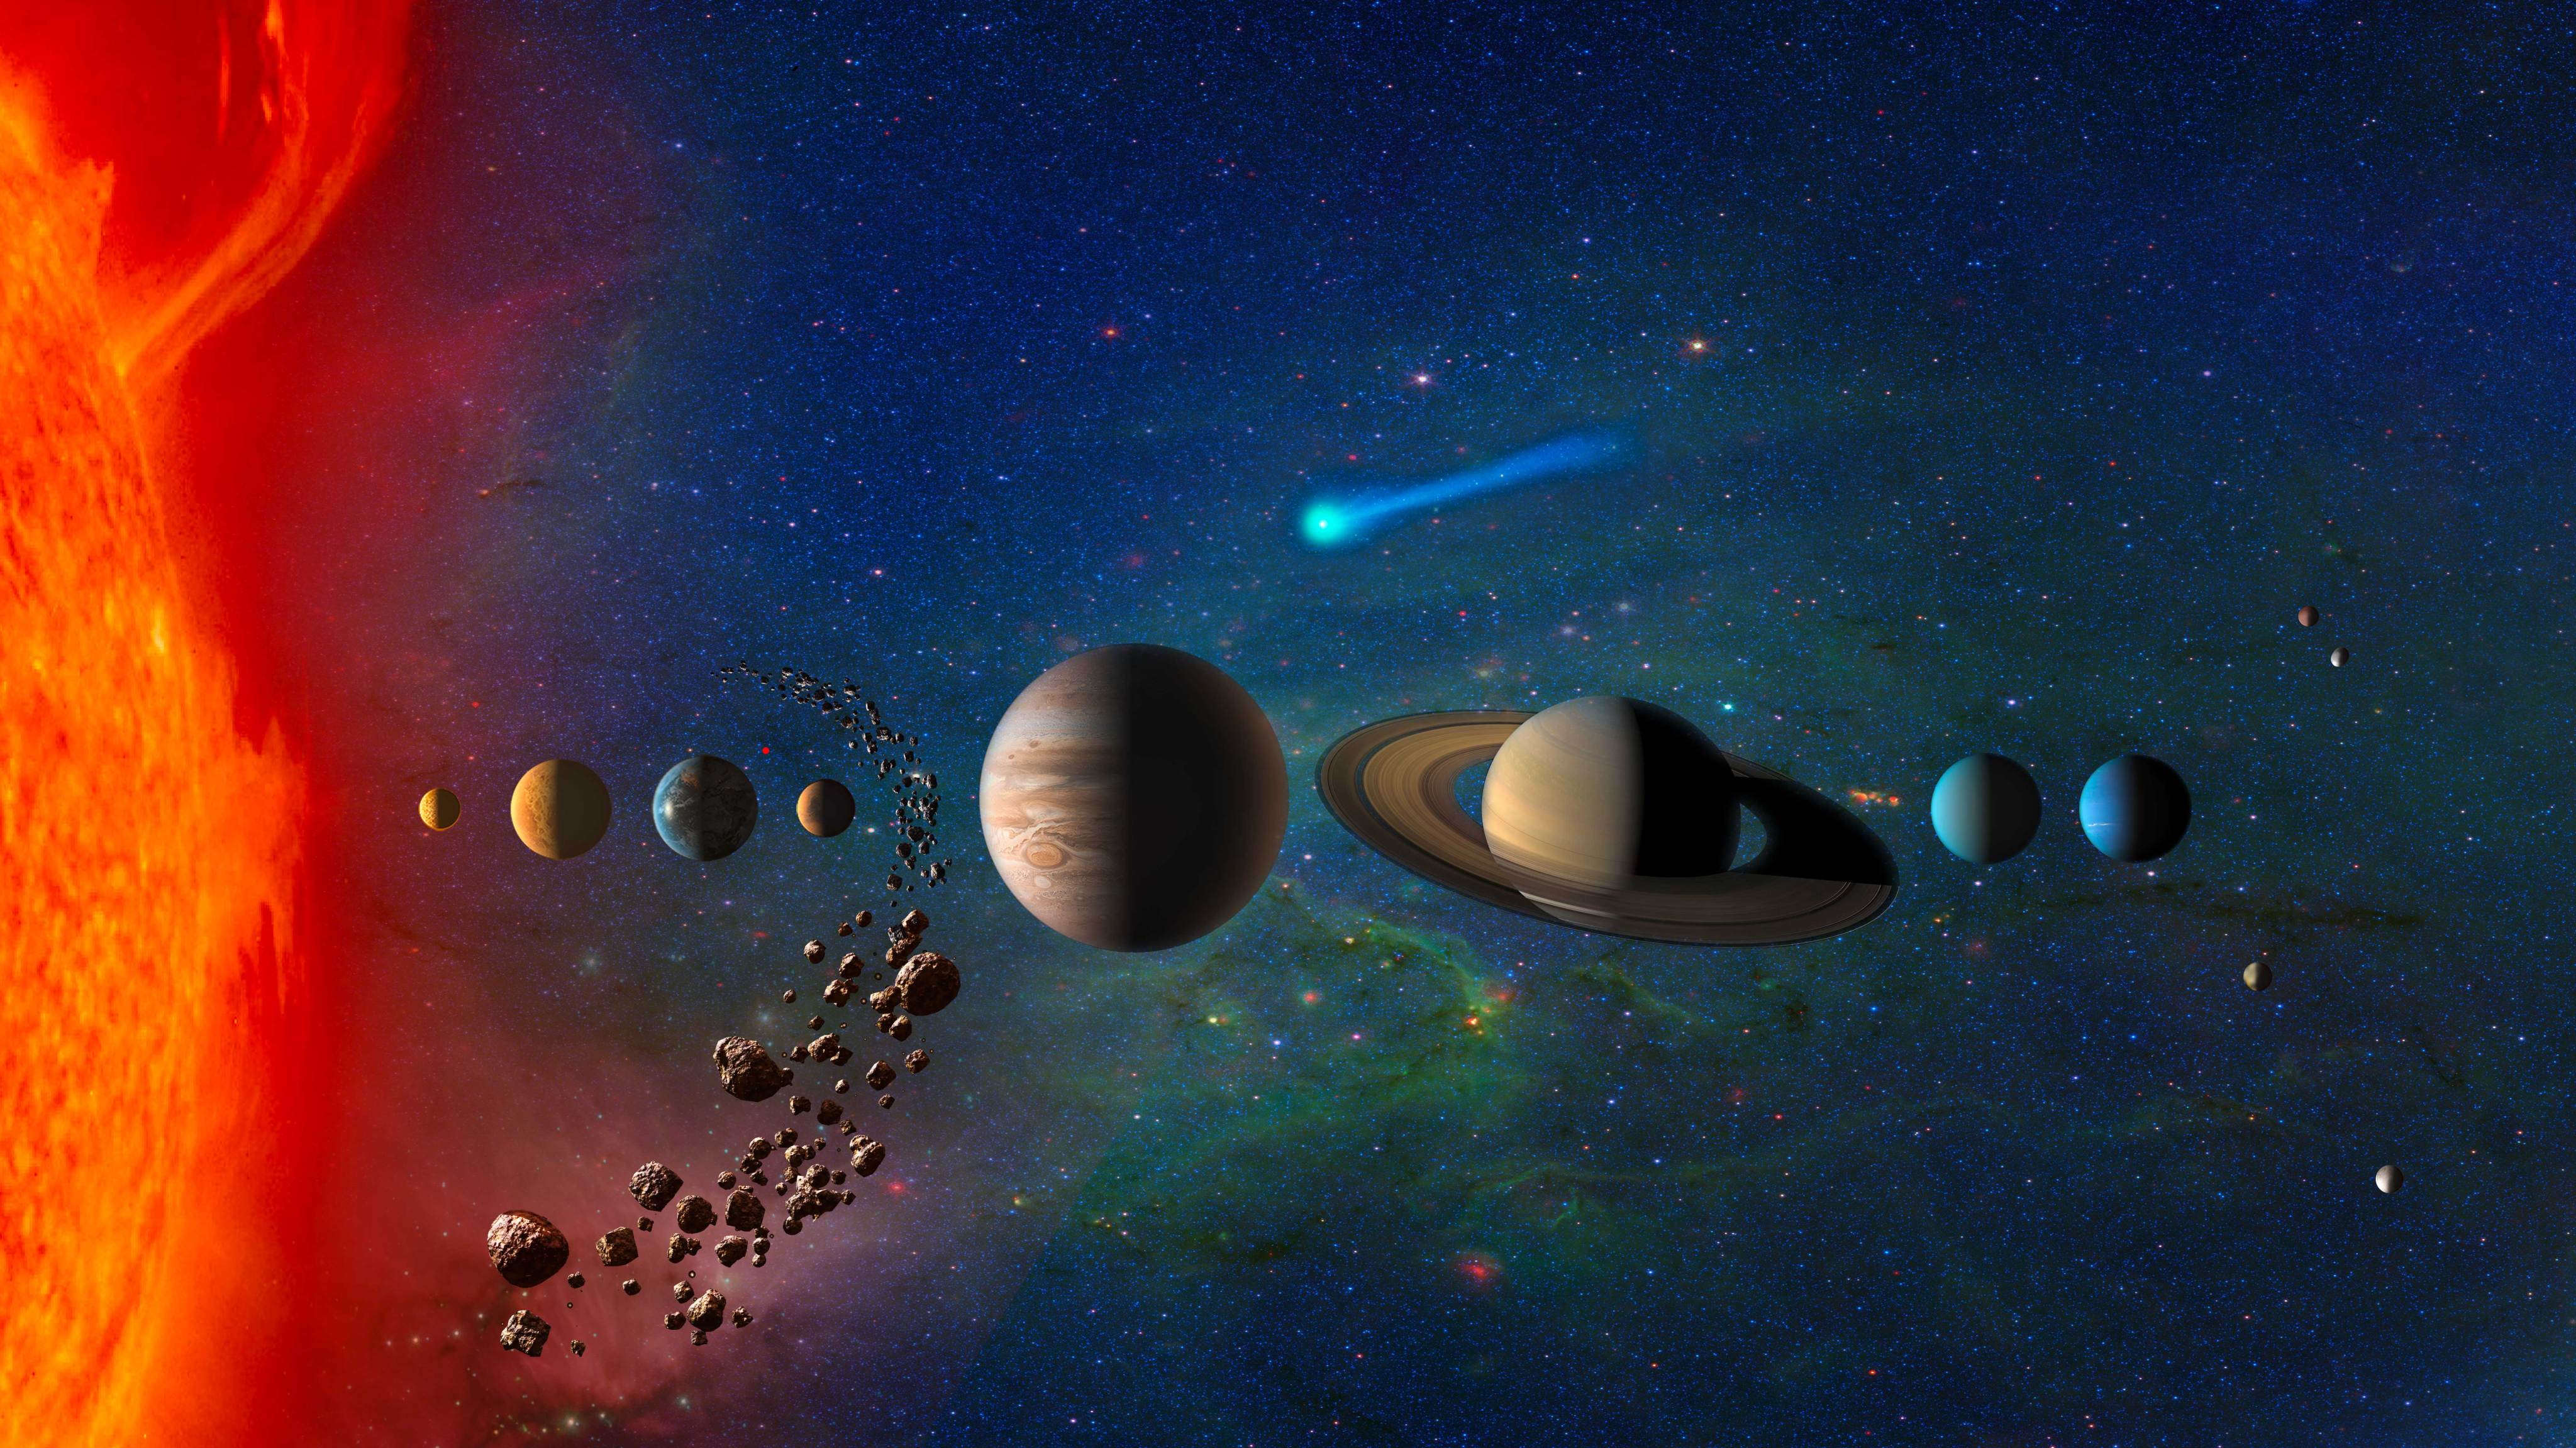 An illustration of a slice of a bright orange sun, with planets, a comet and asteroids against a blue-black backround.